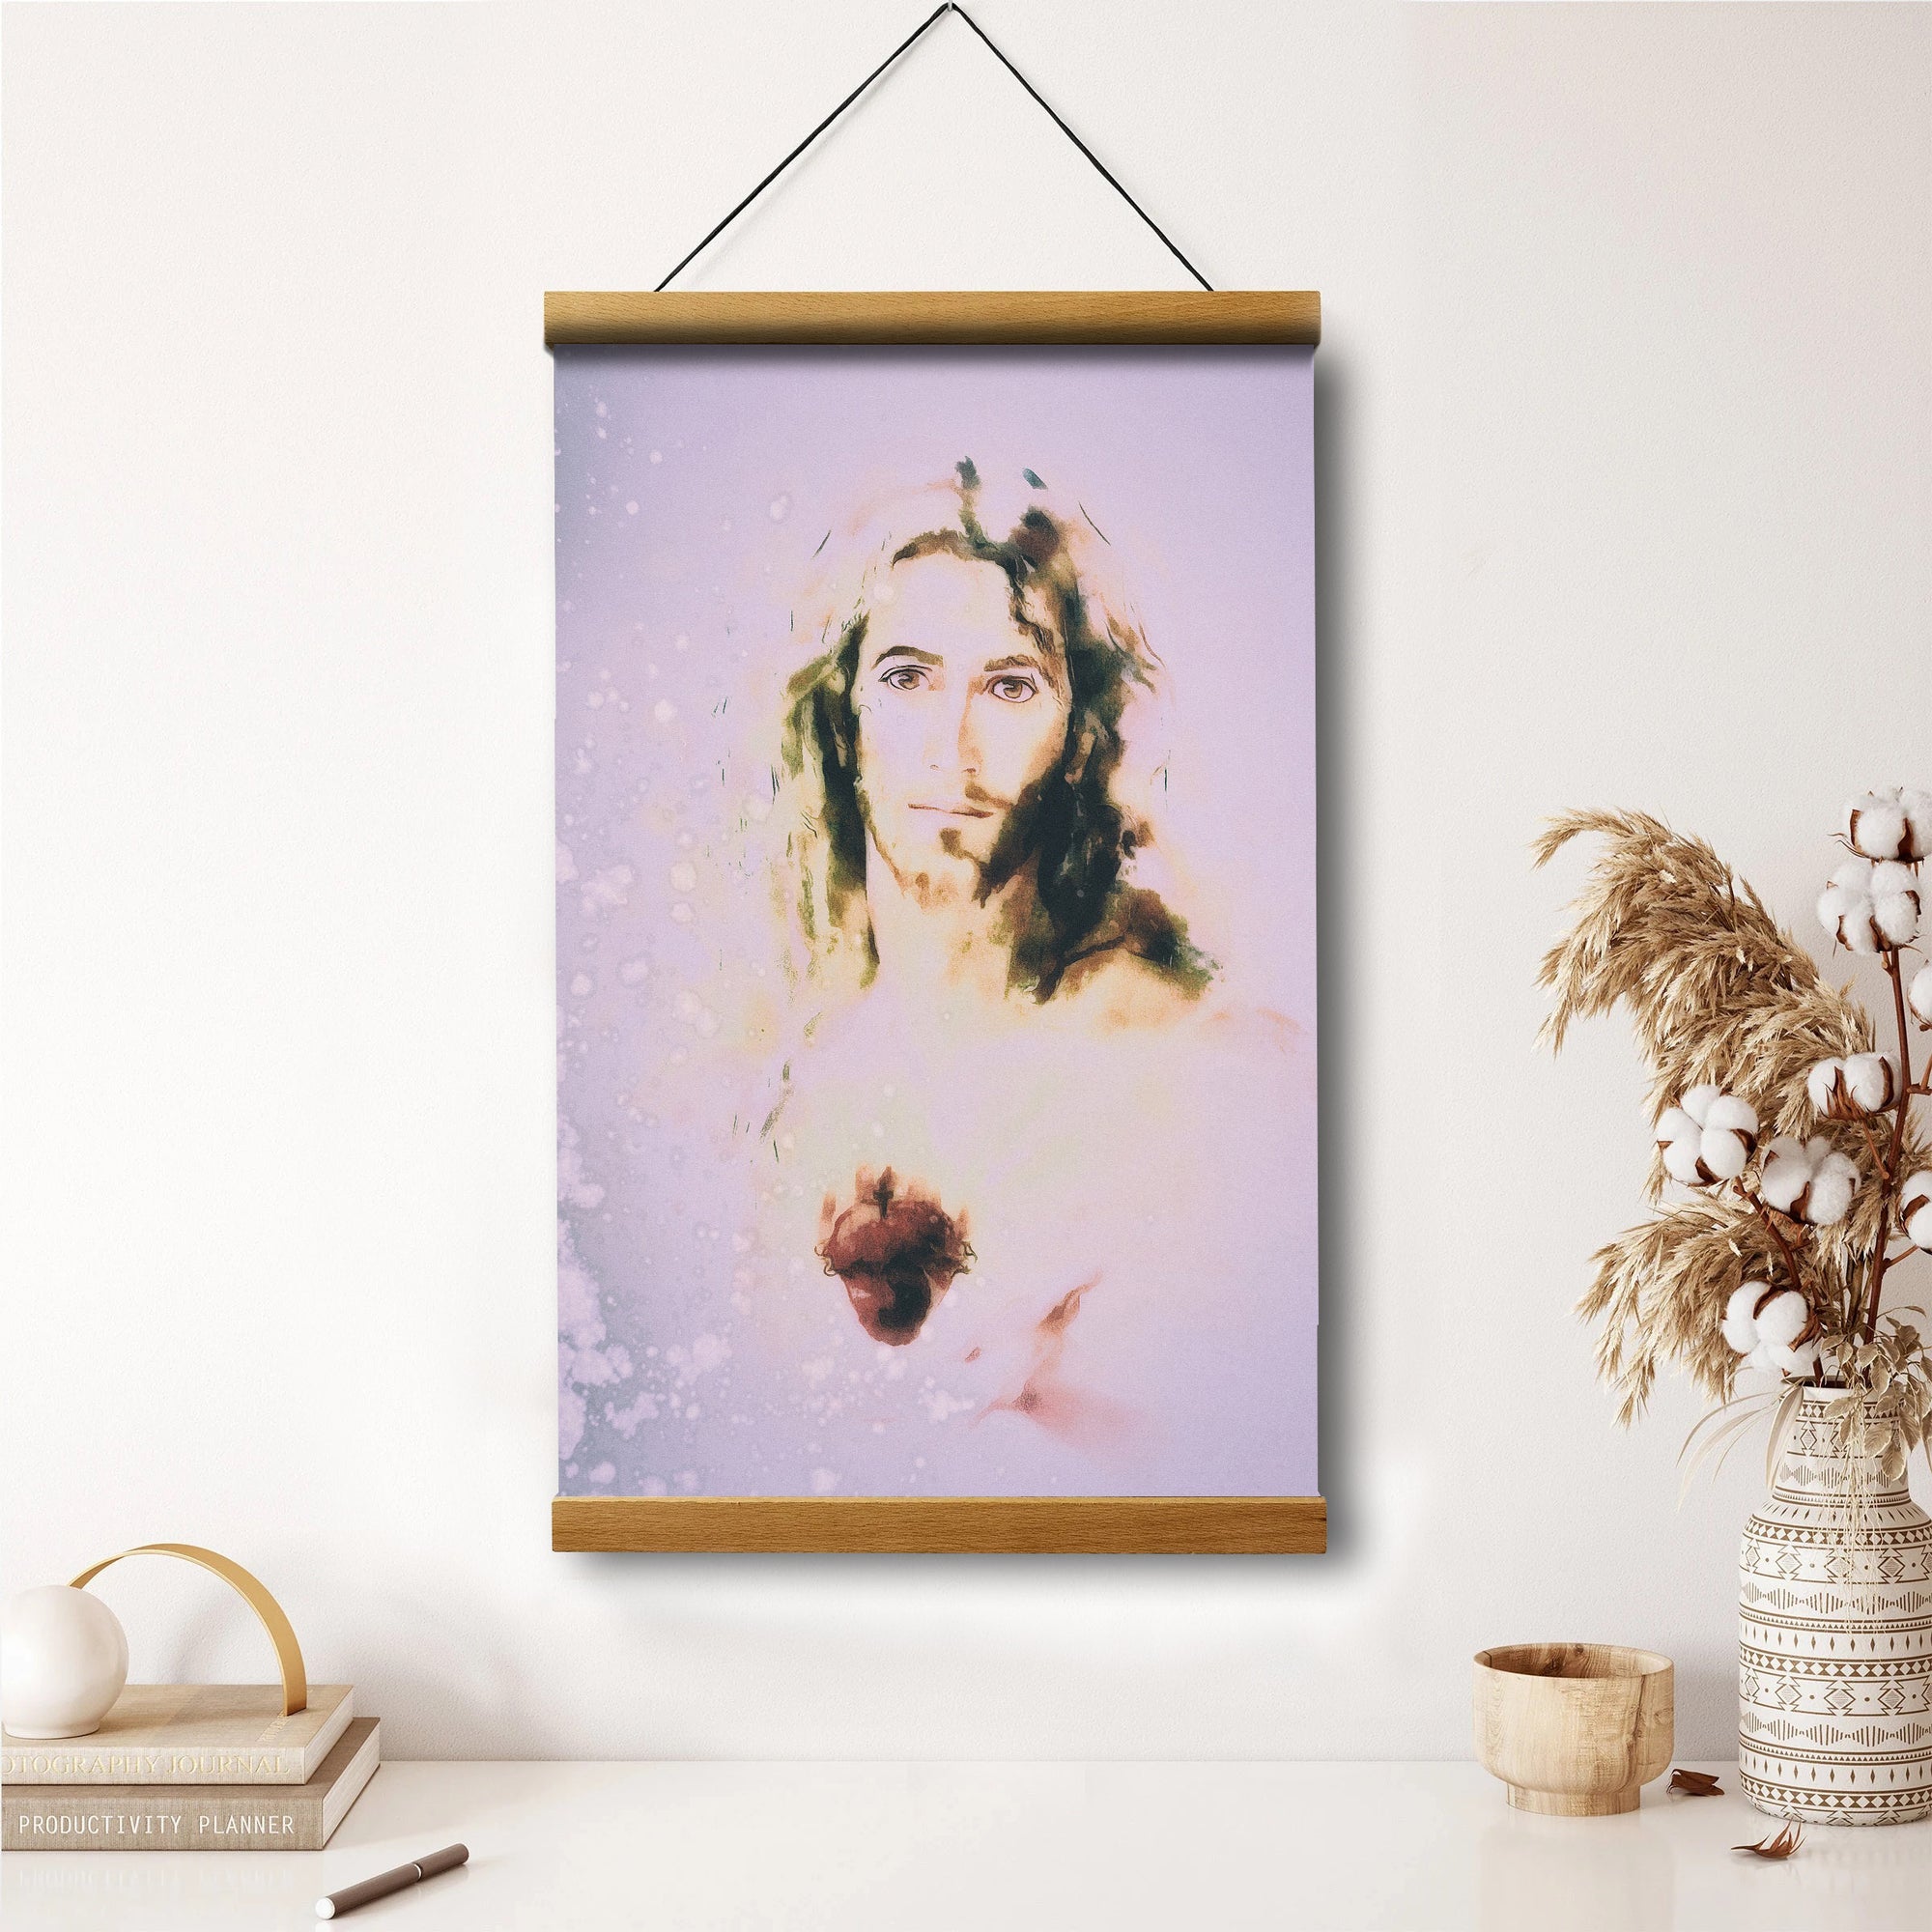 The Sacred Heart Of Jesus Hanging Canvas Wall Art - Jesus Portrait Picture - Religious Gift - Christian Wall Art Decor